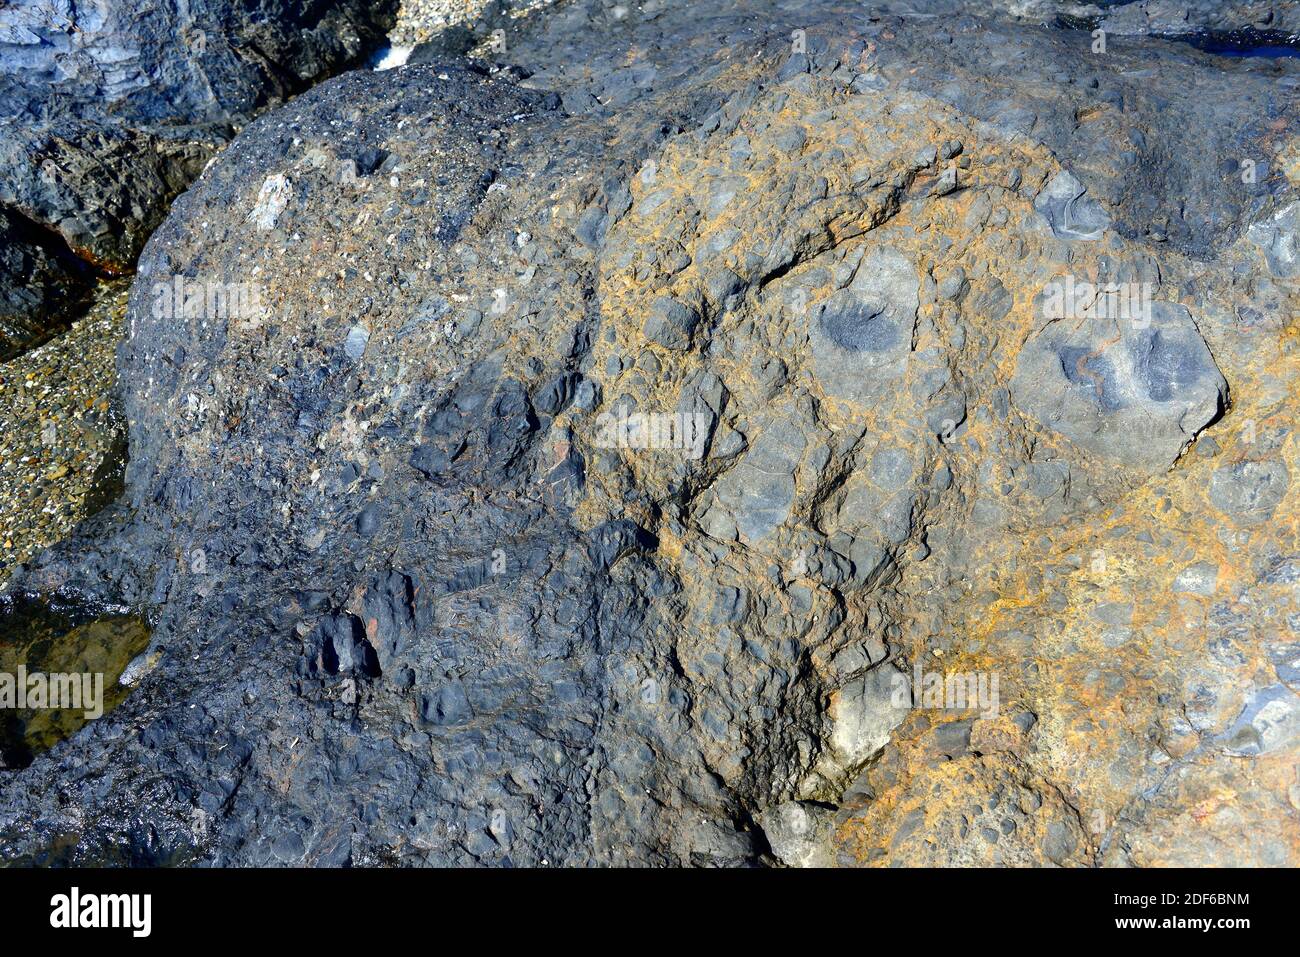 Fault breccia is a breccia formed for the grinding action of two blocks fault that rub. This photo was taken in Cabo Creus, Girona, Catalonia, Spain. Stock Photo